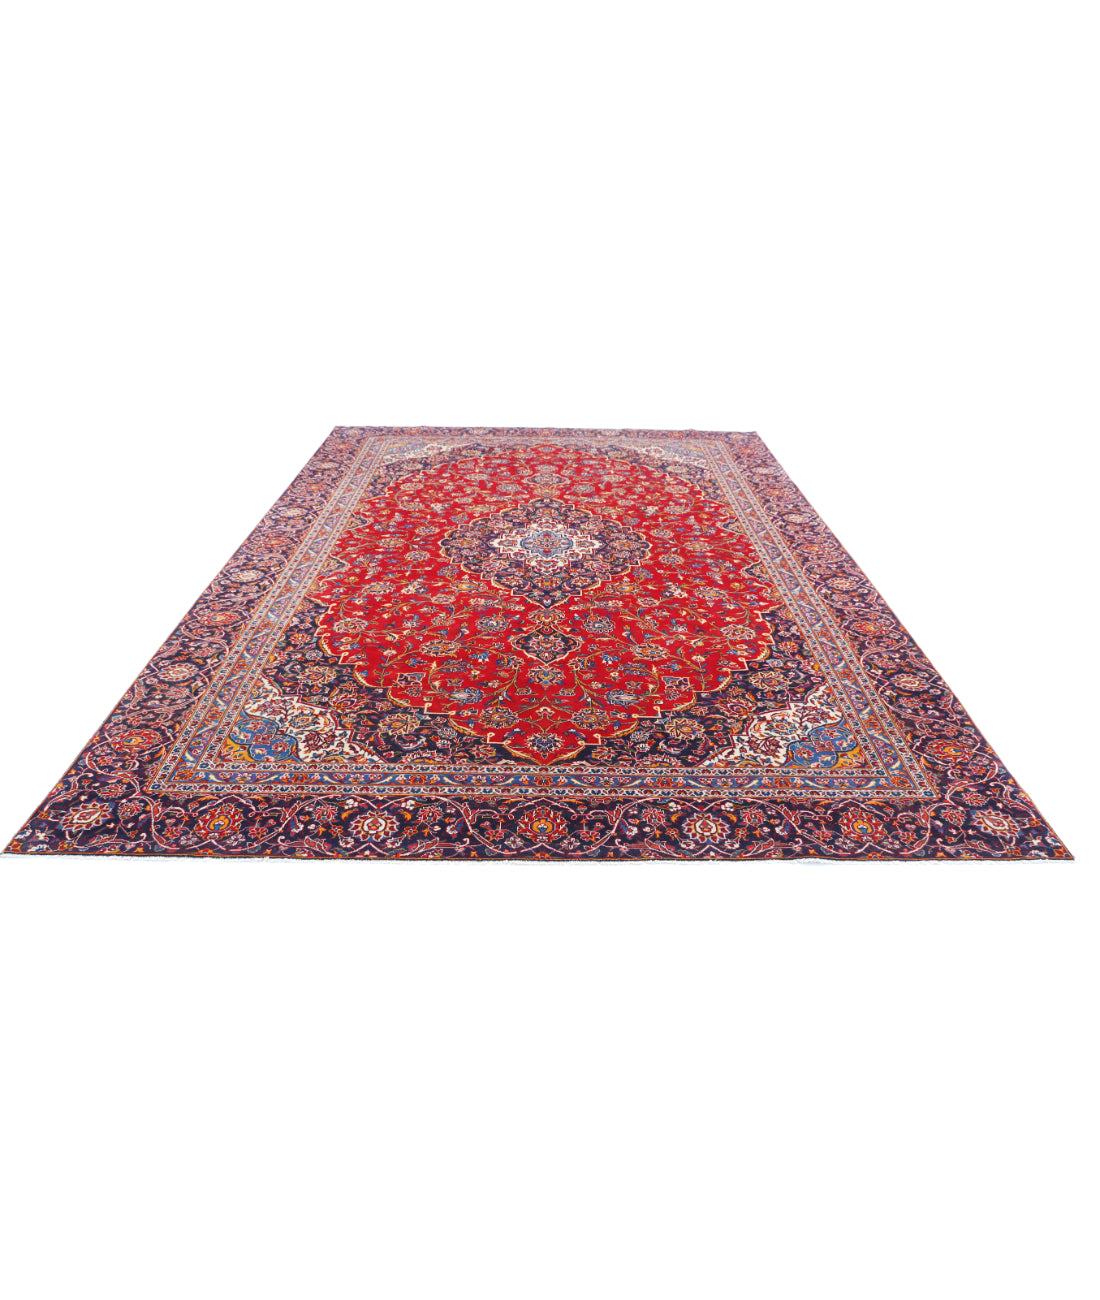 Hand Knotted Persian Kashan Wool Rug - 9'1'' x 12'9'' 9'1'' x 12'9'' (273 X 383) / Red / Blue